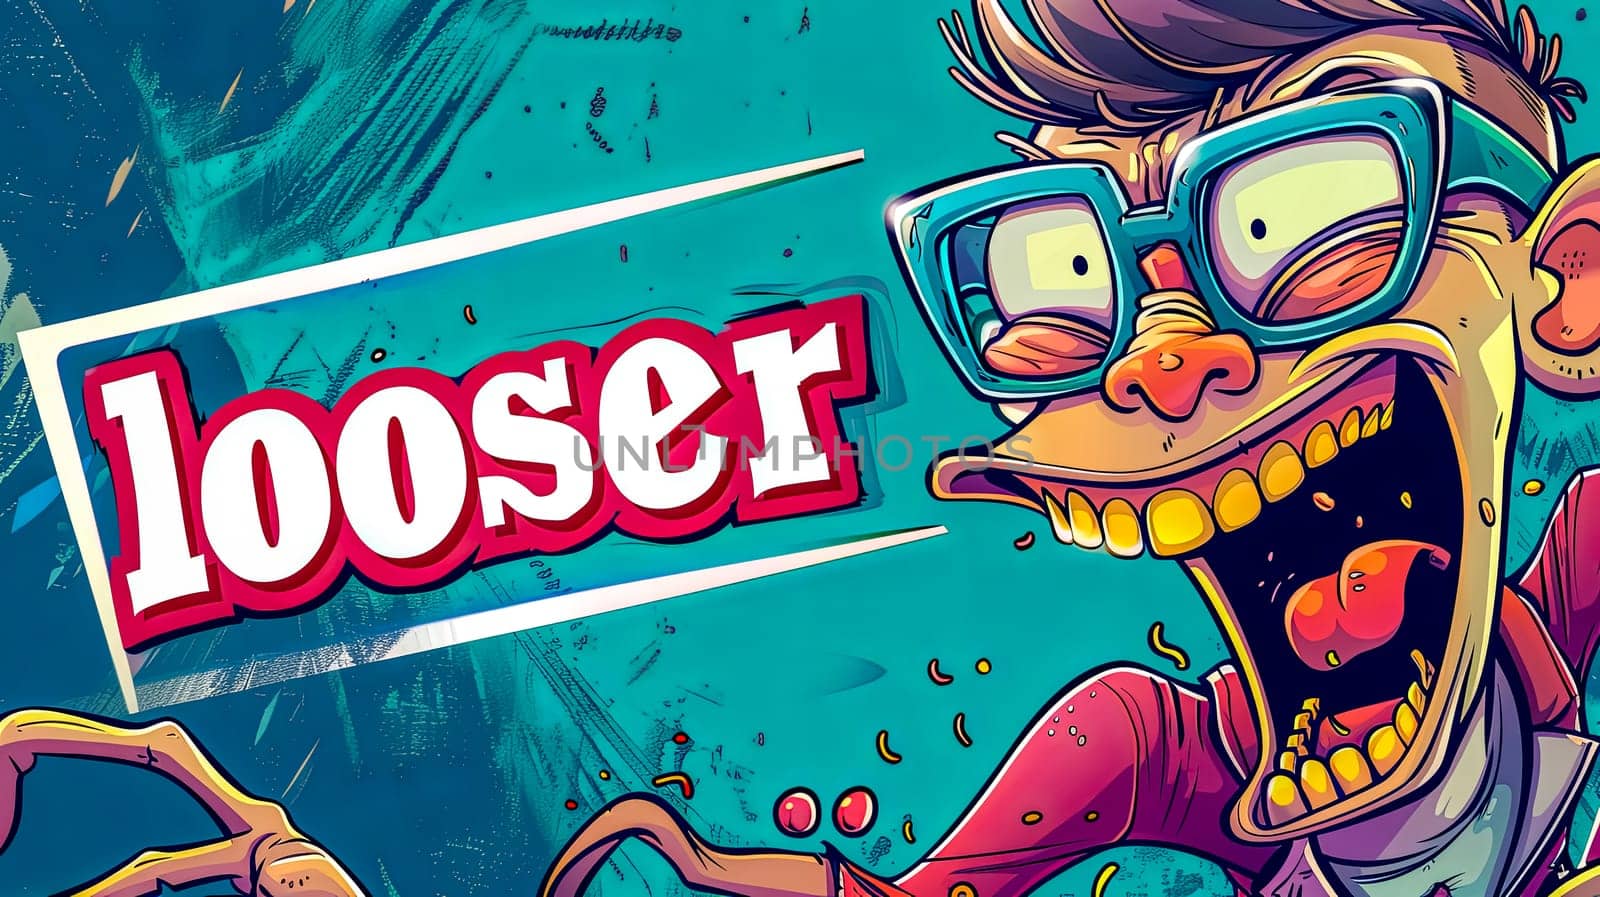 Comic style loser expression illustration by Edophoto